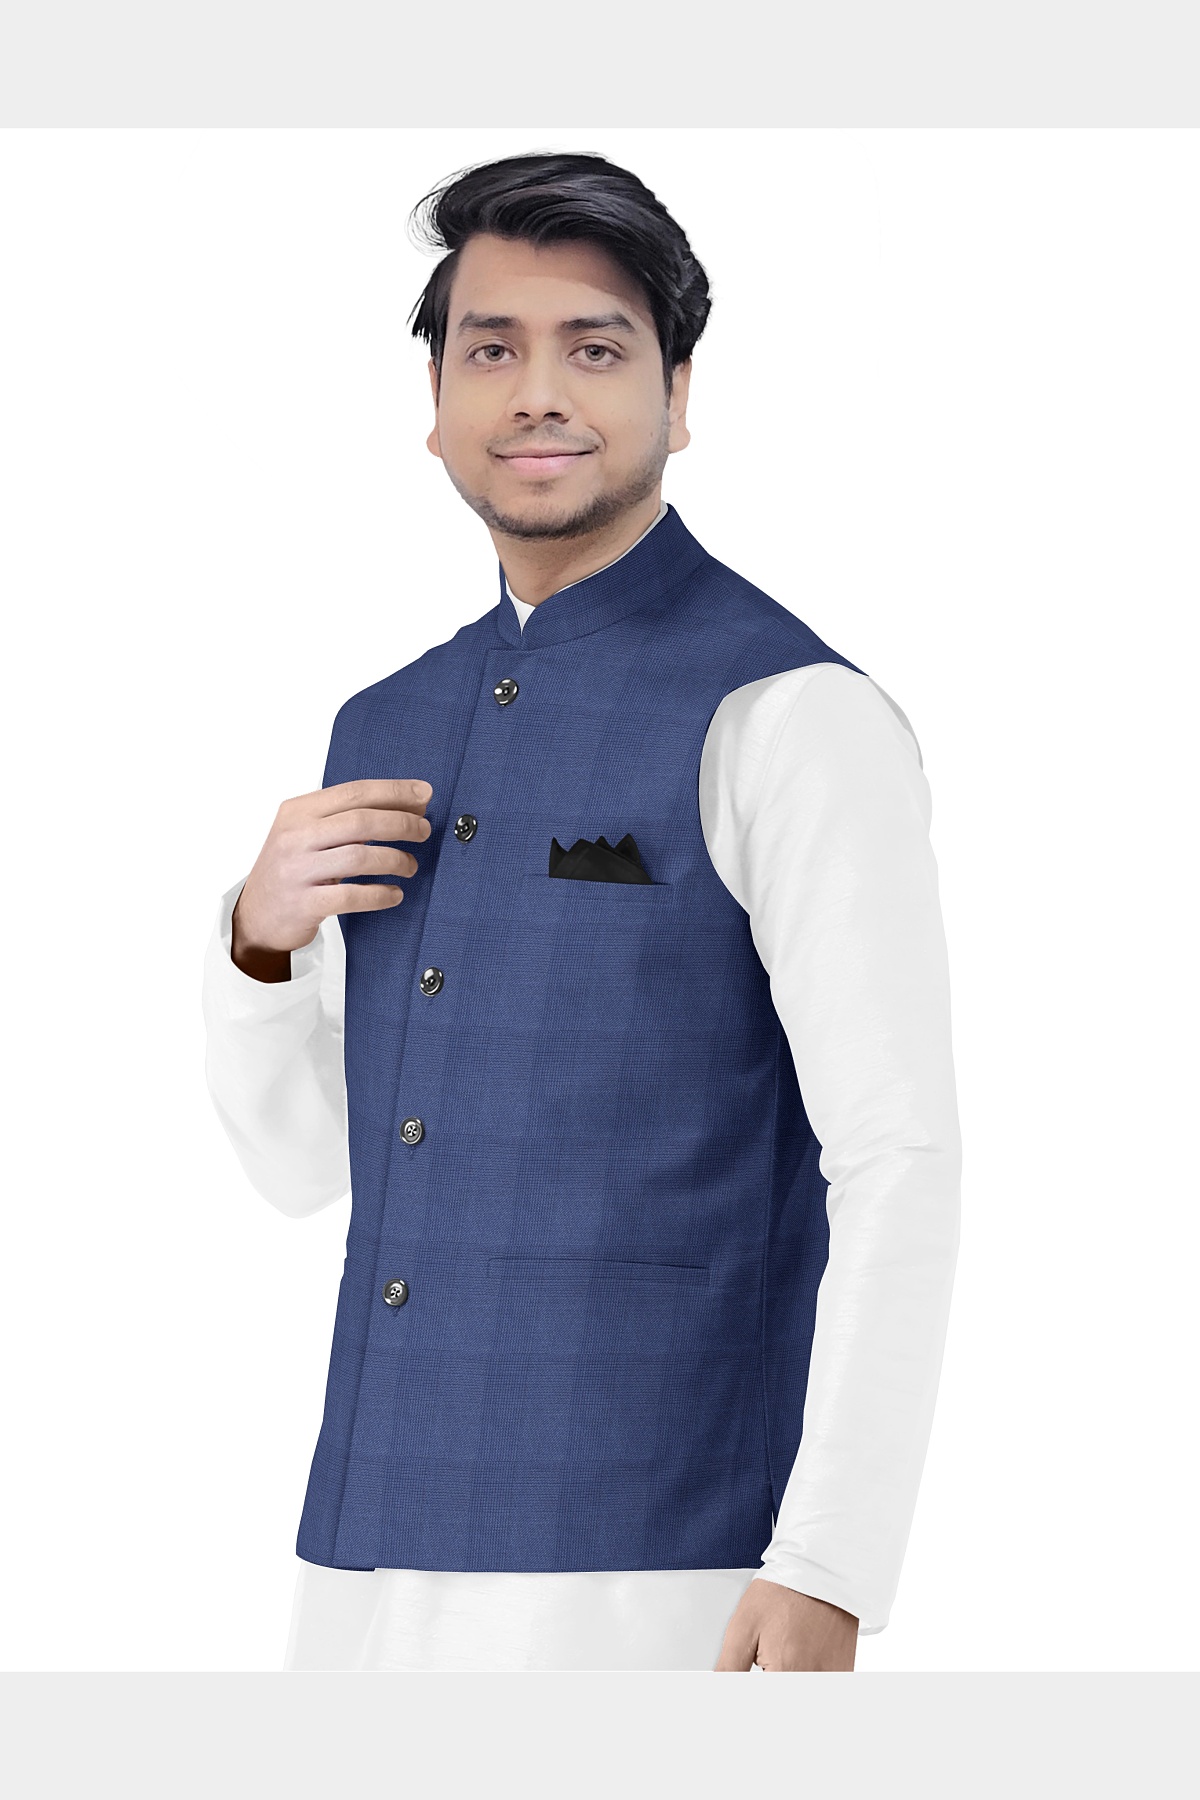 T wool Col 38 all set309 nehrujacket side 2024 2 10 20 57 26 2730X4096